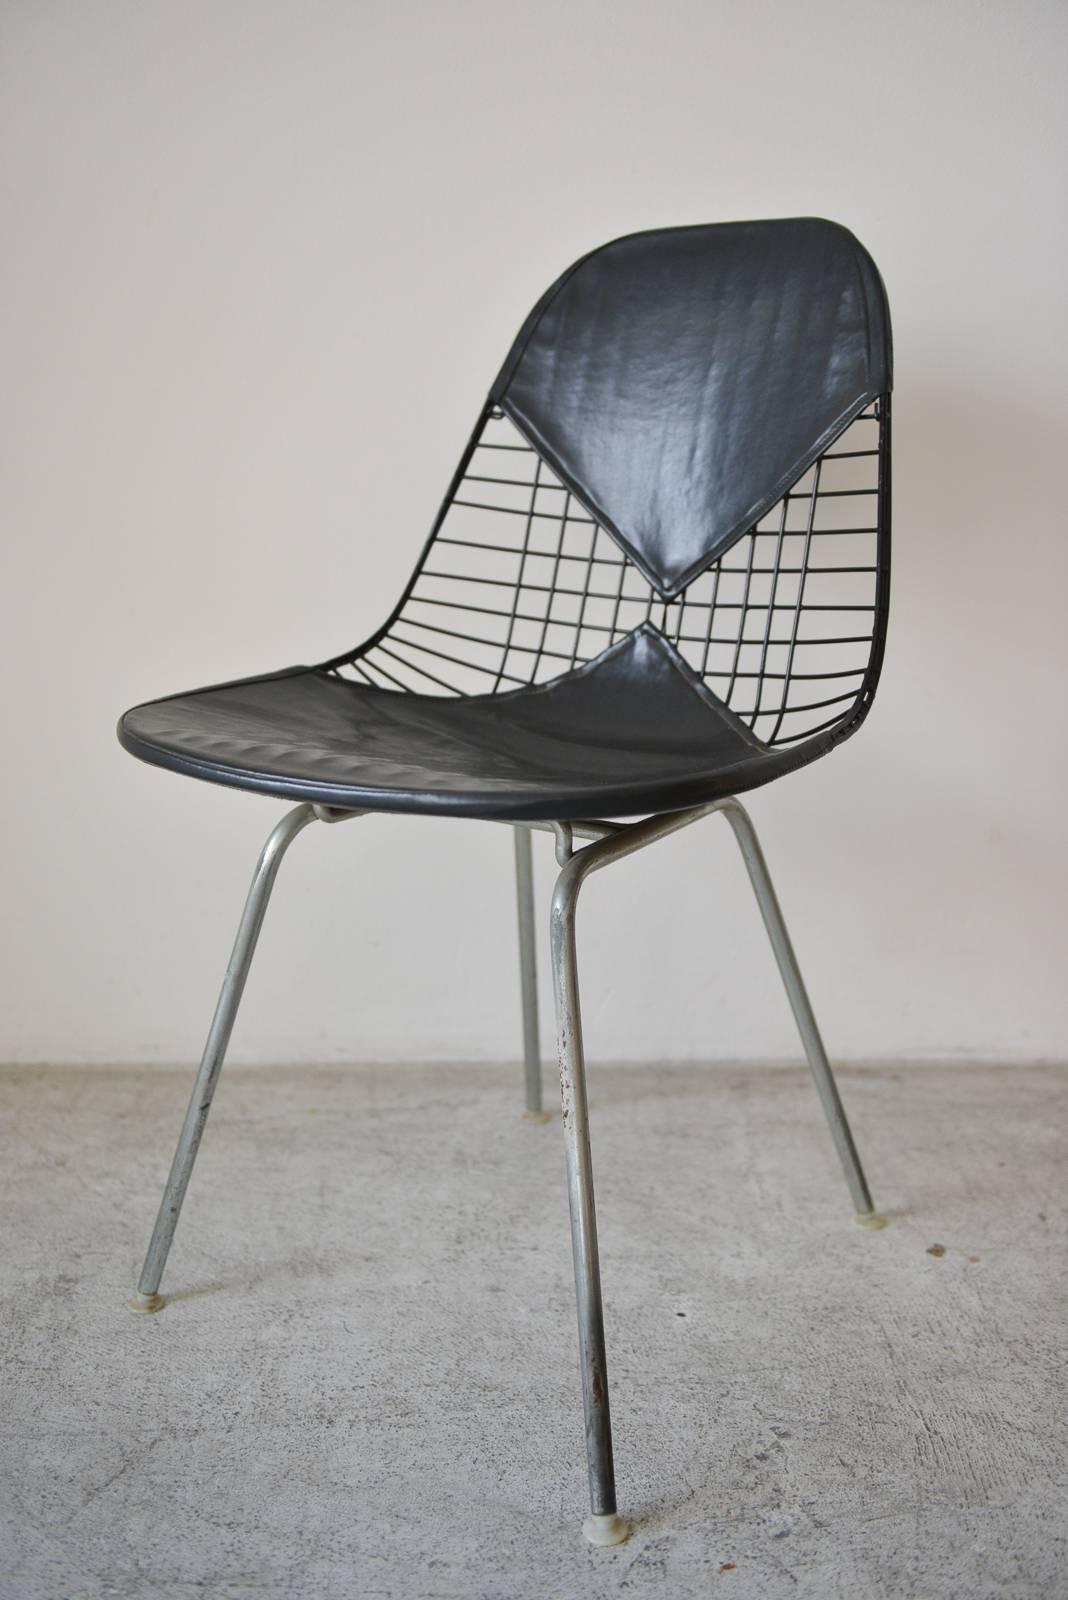 Eames DKX-2 vintage wire chair with leather bikini cover. Original condition, leather is good with very little wear and original tags. H-base with original feet.

Can be seen in our showroom at Modern Vault, 361 Old Newport Blvd, Newport Beach, CA